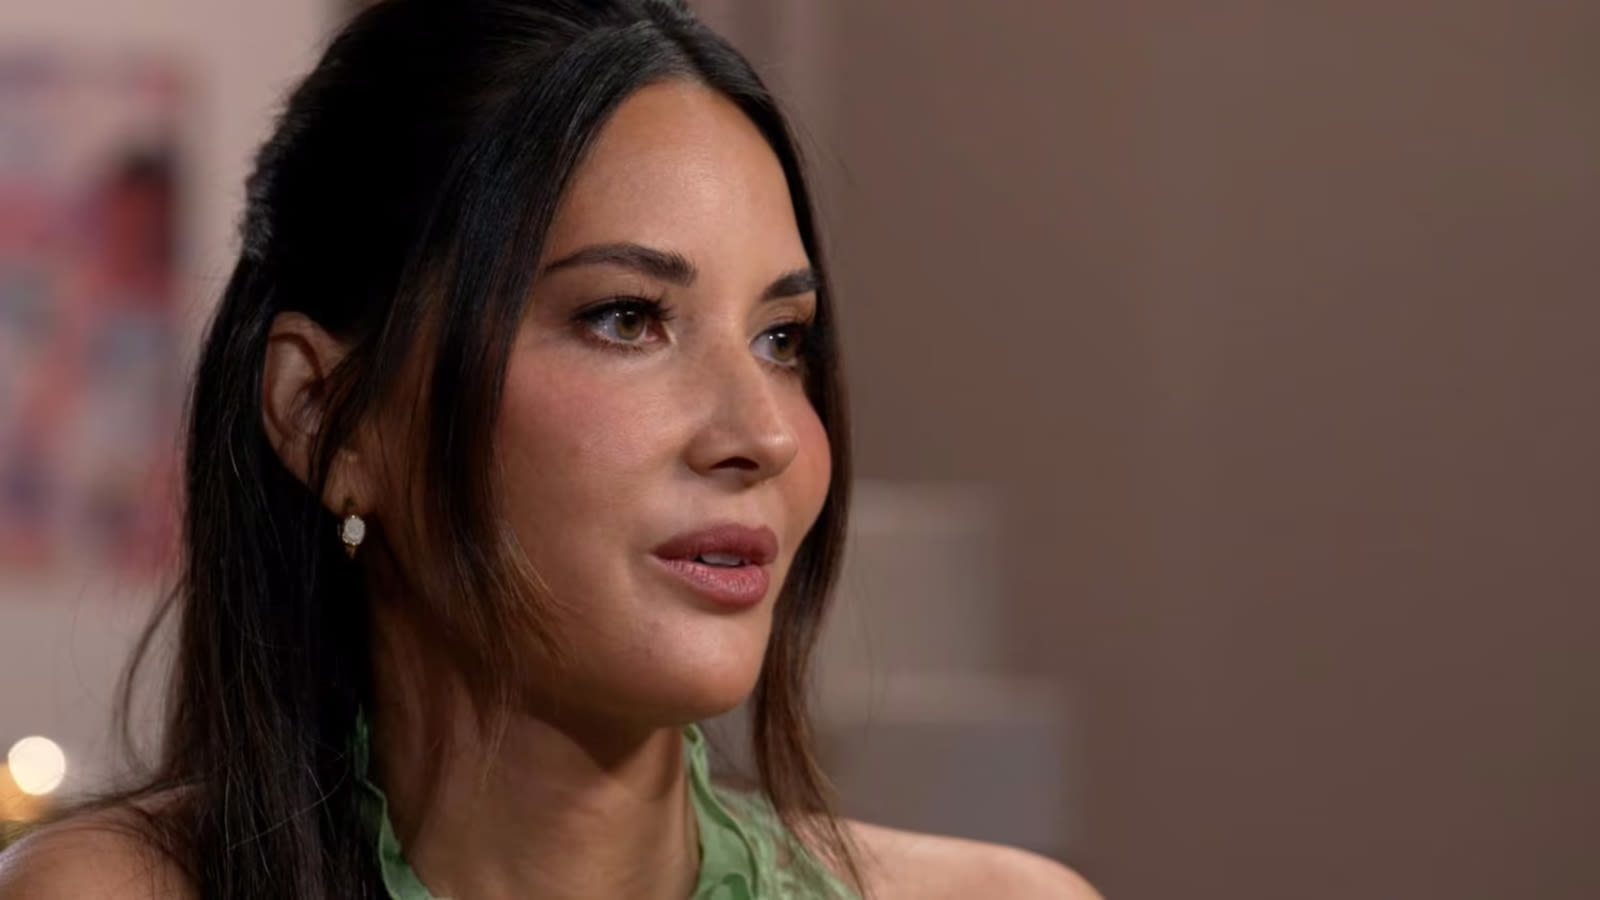 Olivia Munn speaks out about breast cancer, fertility issues in 1st TV interview since surgeries